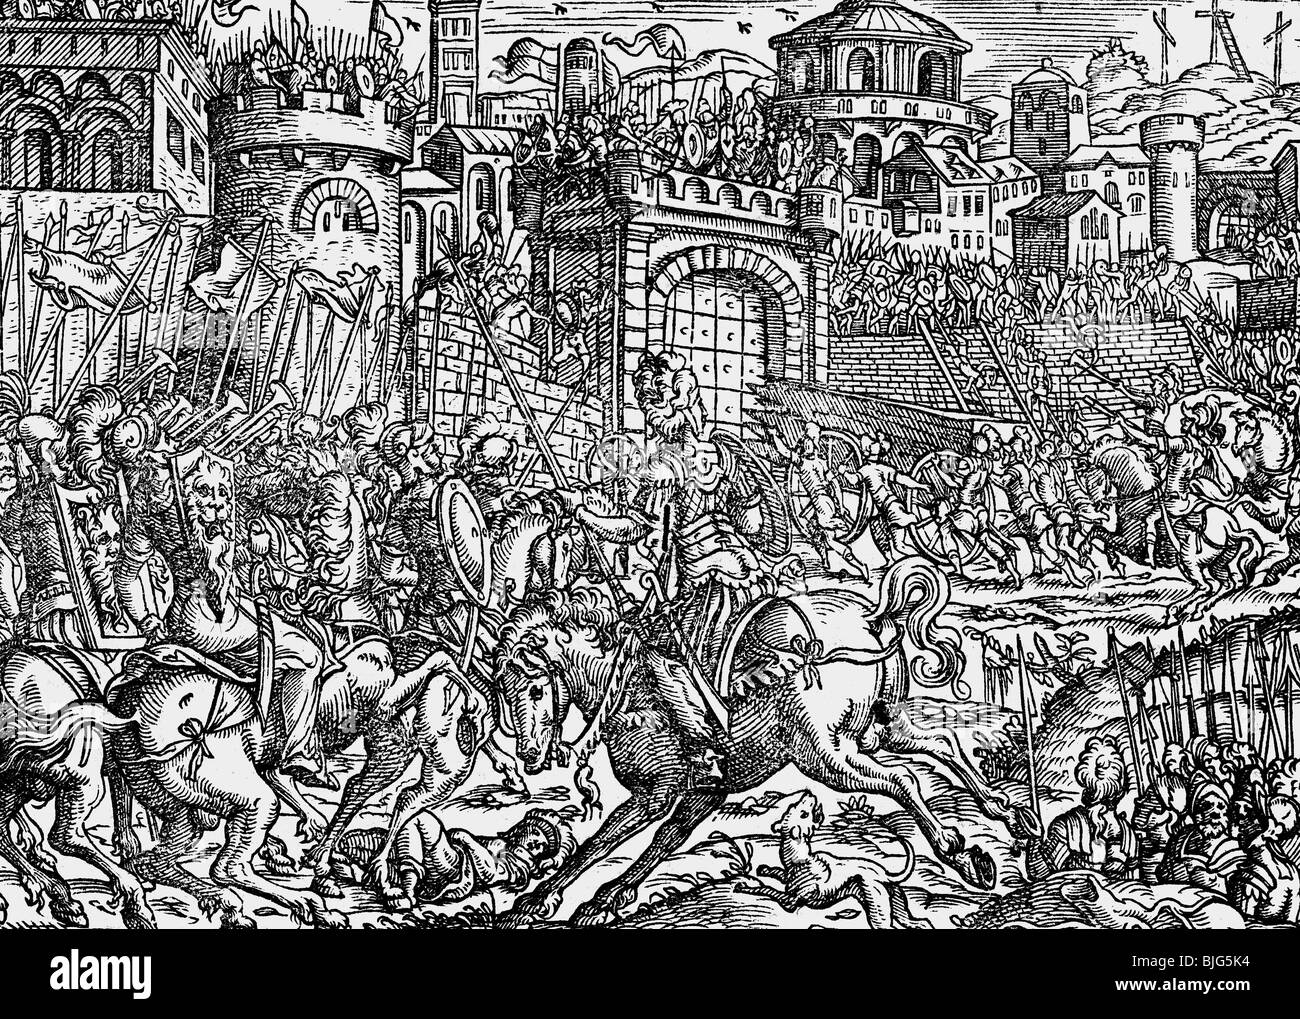 fine arts, Amman, Jost (1539-1591), woodcut, 15.5. cm x 11 cm, illustration, scene: assault of the Romans on Jerusalem, probably from the Luther Bible, which was printed by Sigmund Feyerabend, Frankfurt on the Main, Germany, 1564, Artist's Copyright has not to be cleared Stock Photo